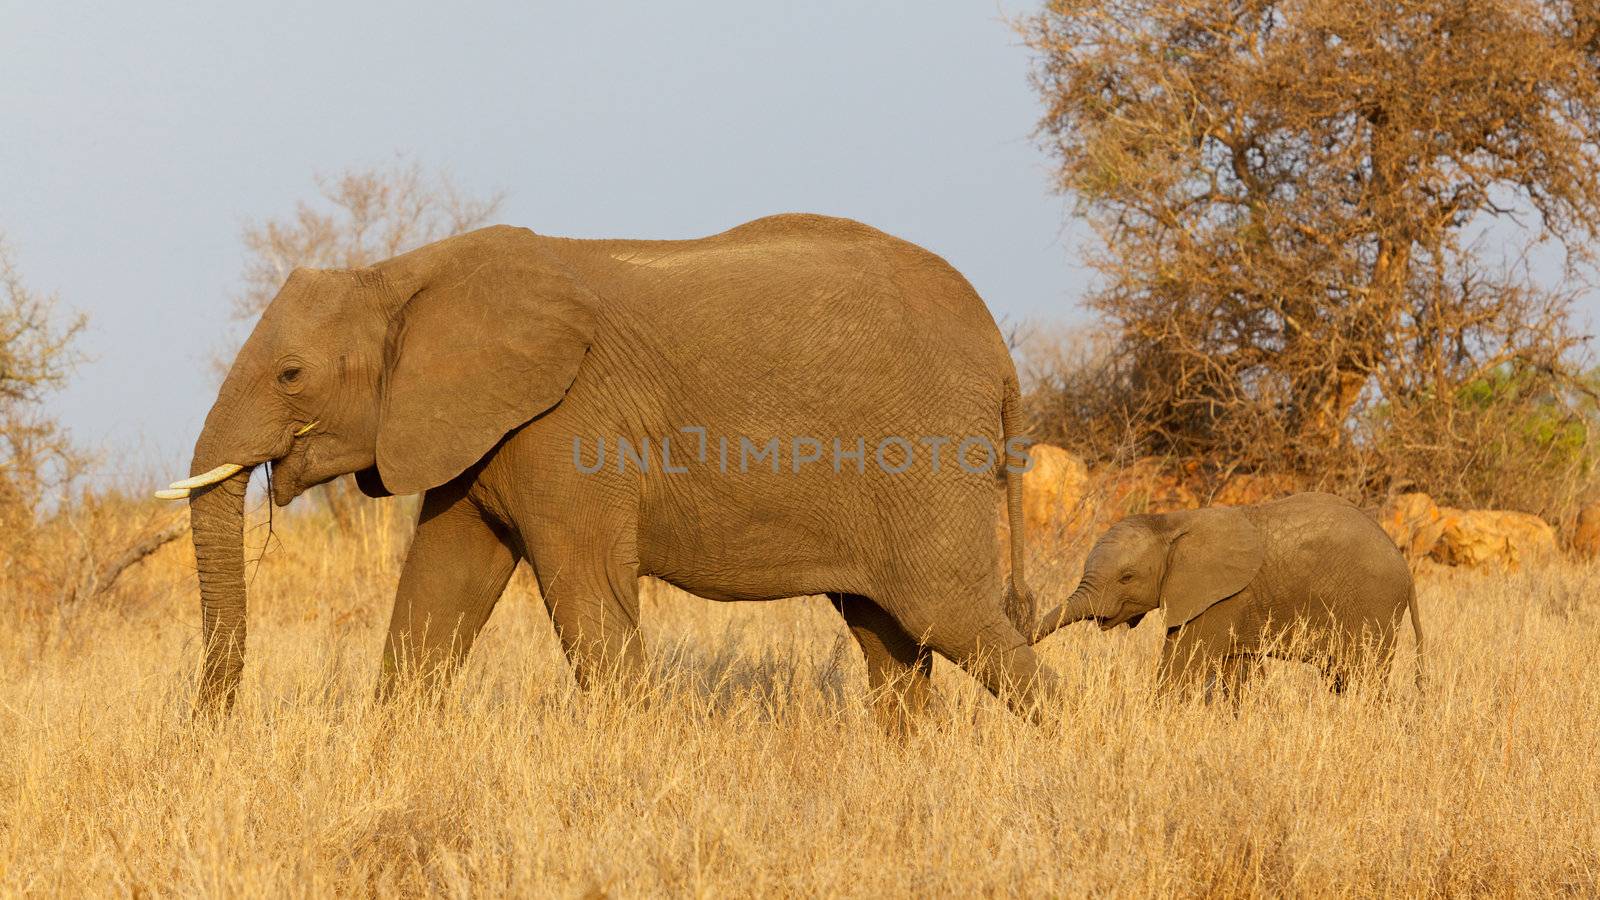 An African elephant (Loxodonta africana) with her calf, Kruger National Park, South Africa.